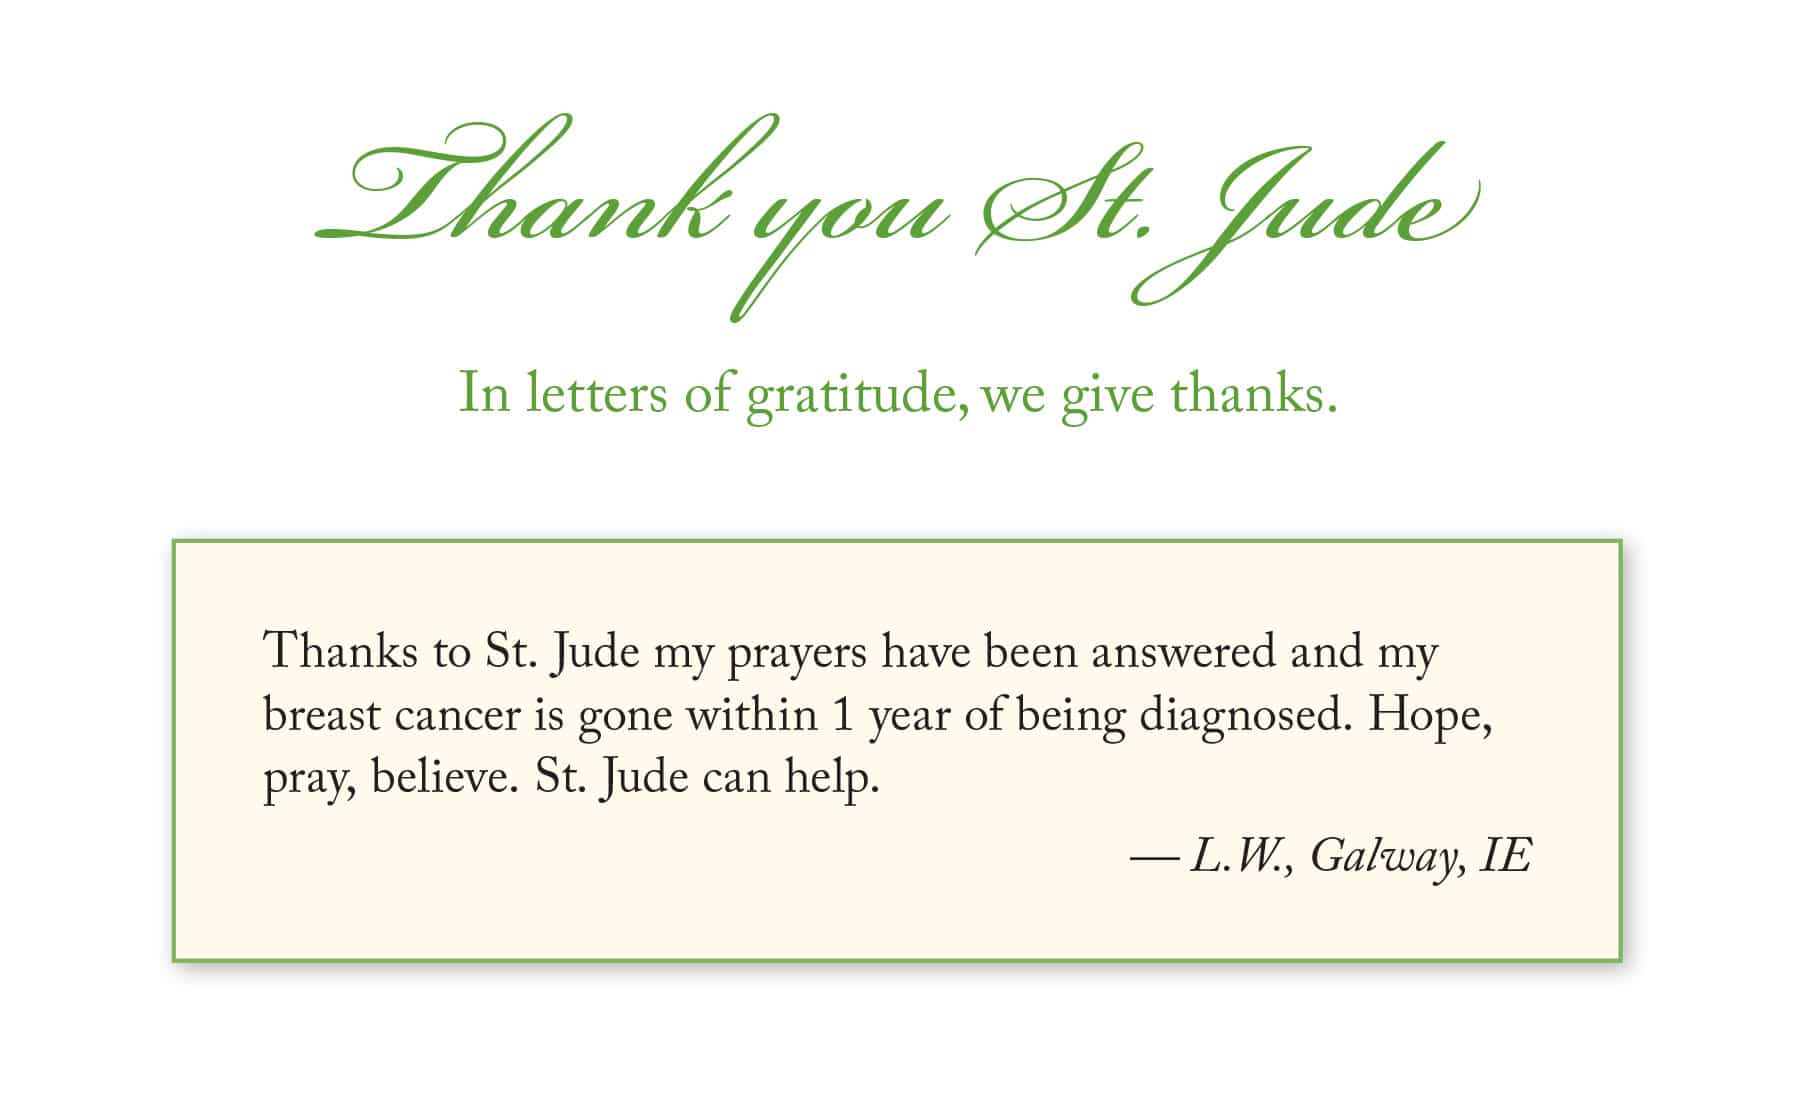 Letters of Gratitude January 2020